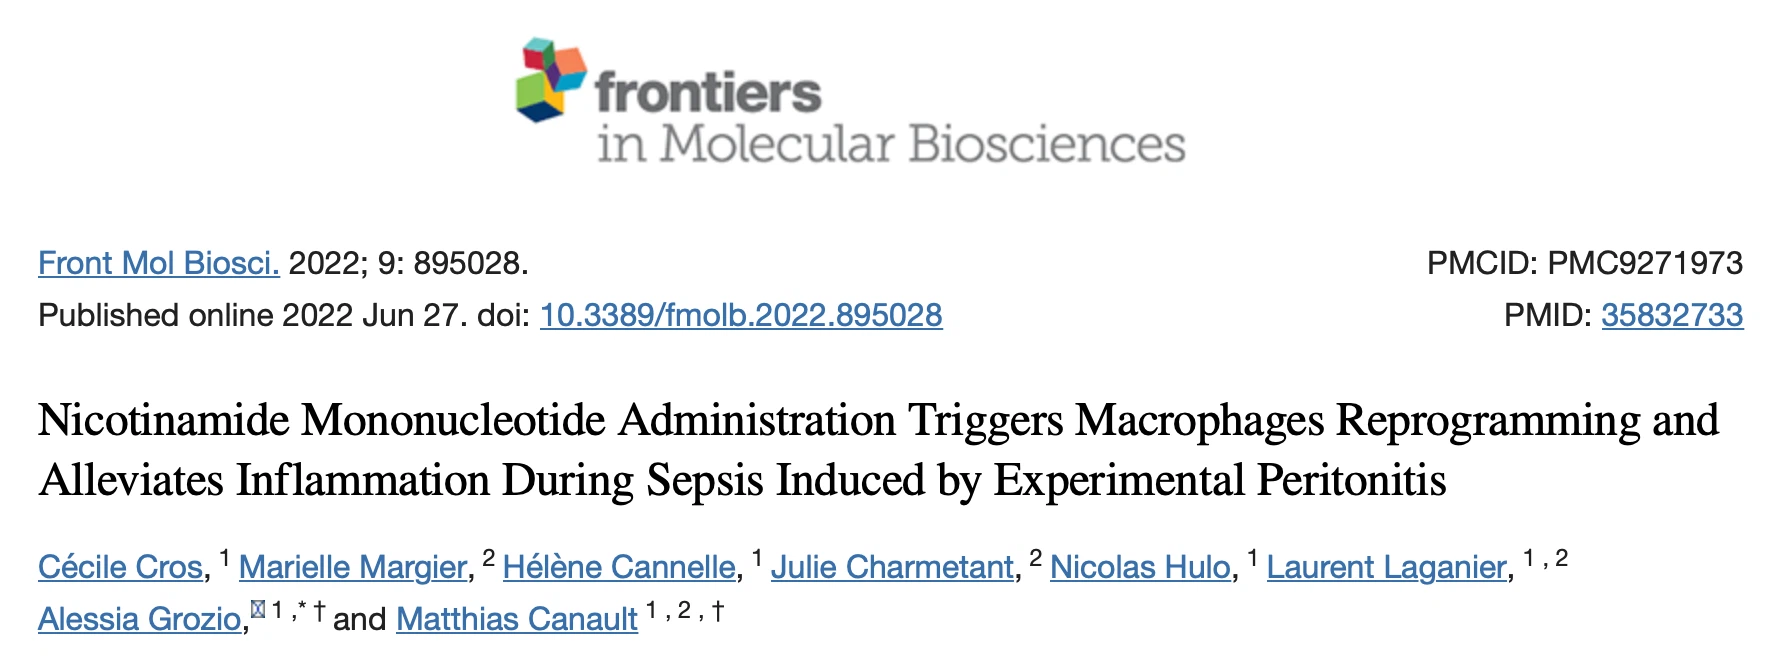 Nicotinamide Mononucleotide Administration Triggers Macrophages Reprogramming andAlleviates Inflammation During Sepsis Induced by Experimental Peritonitis